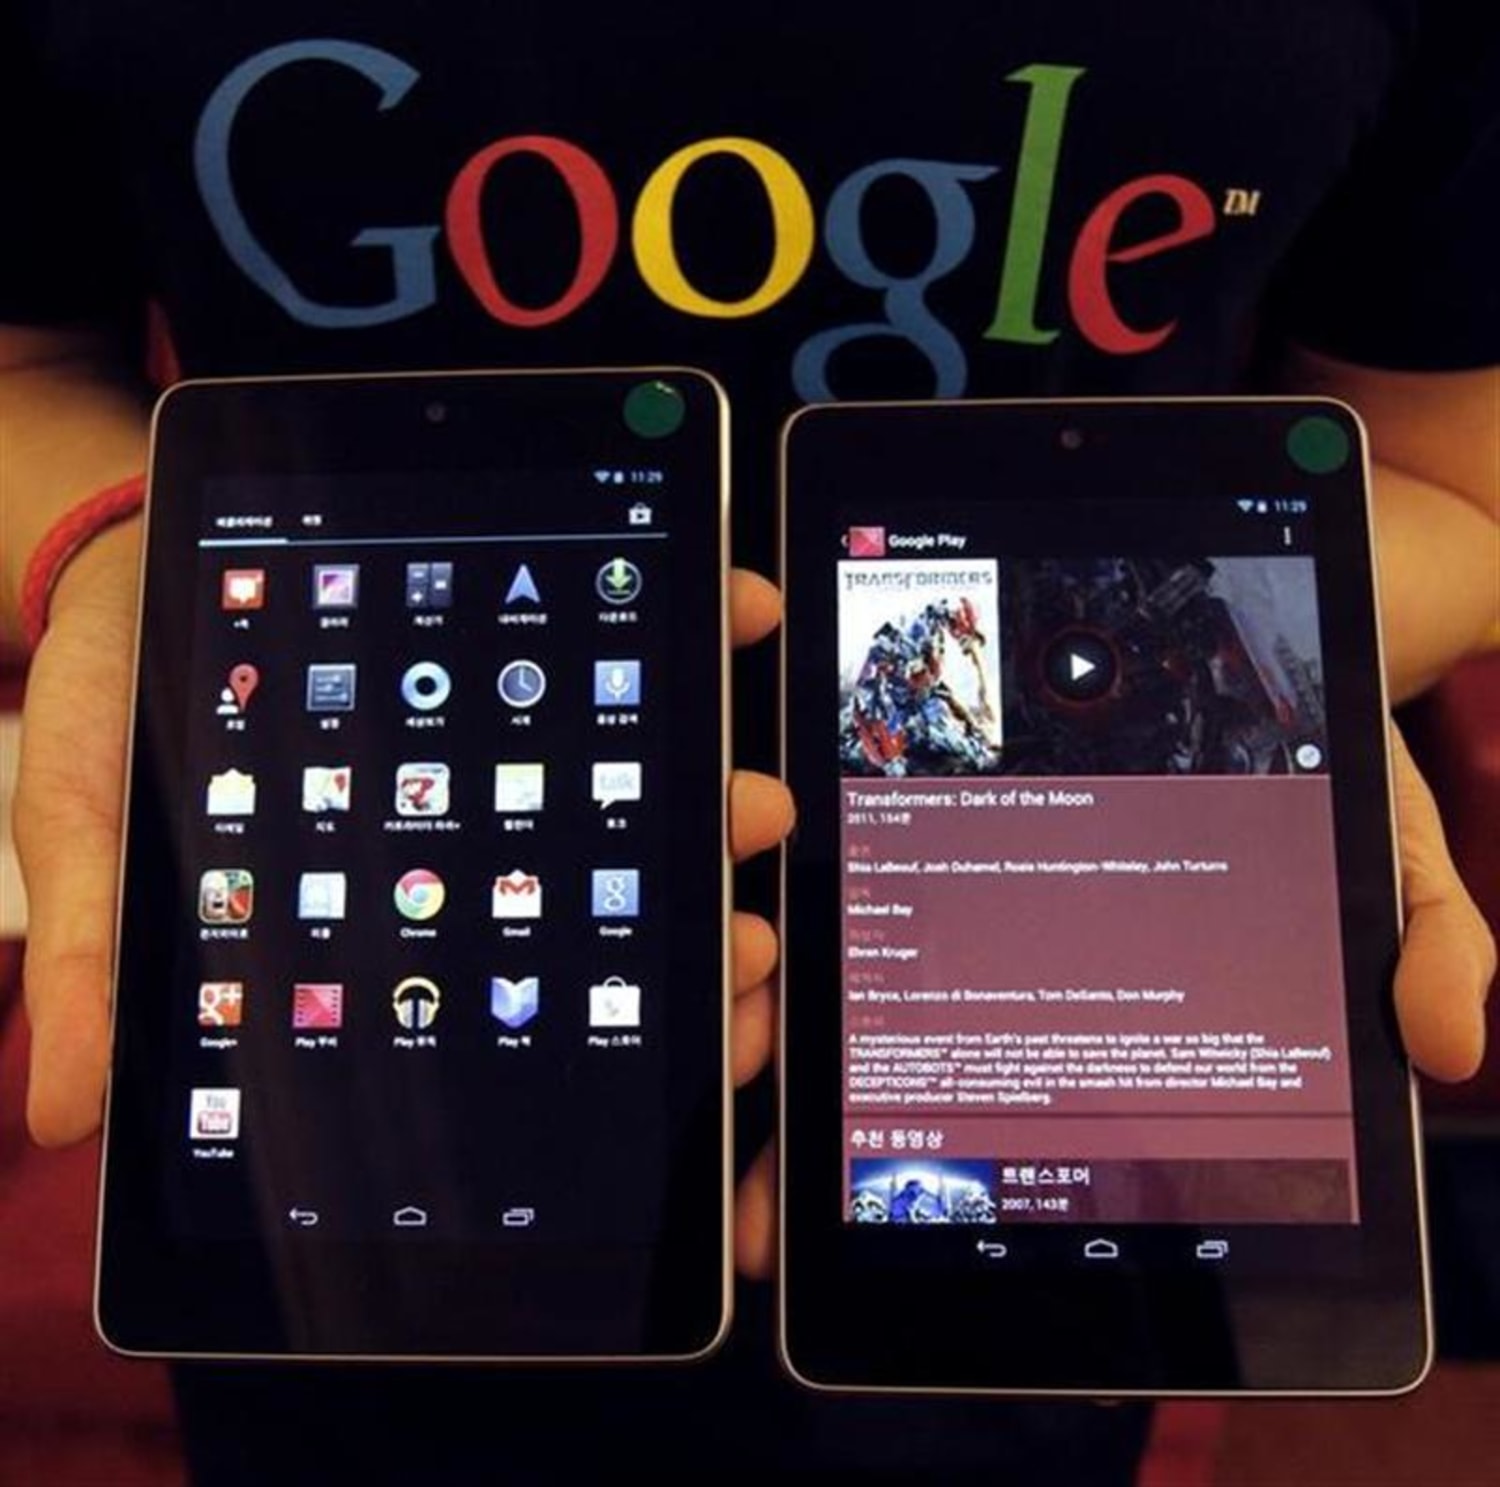 Google Nexus 7 available in the Netherlands, Italy and Japan, on